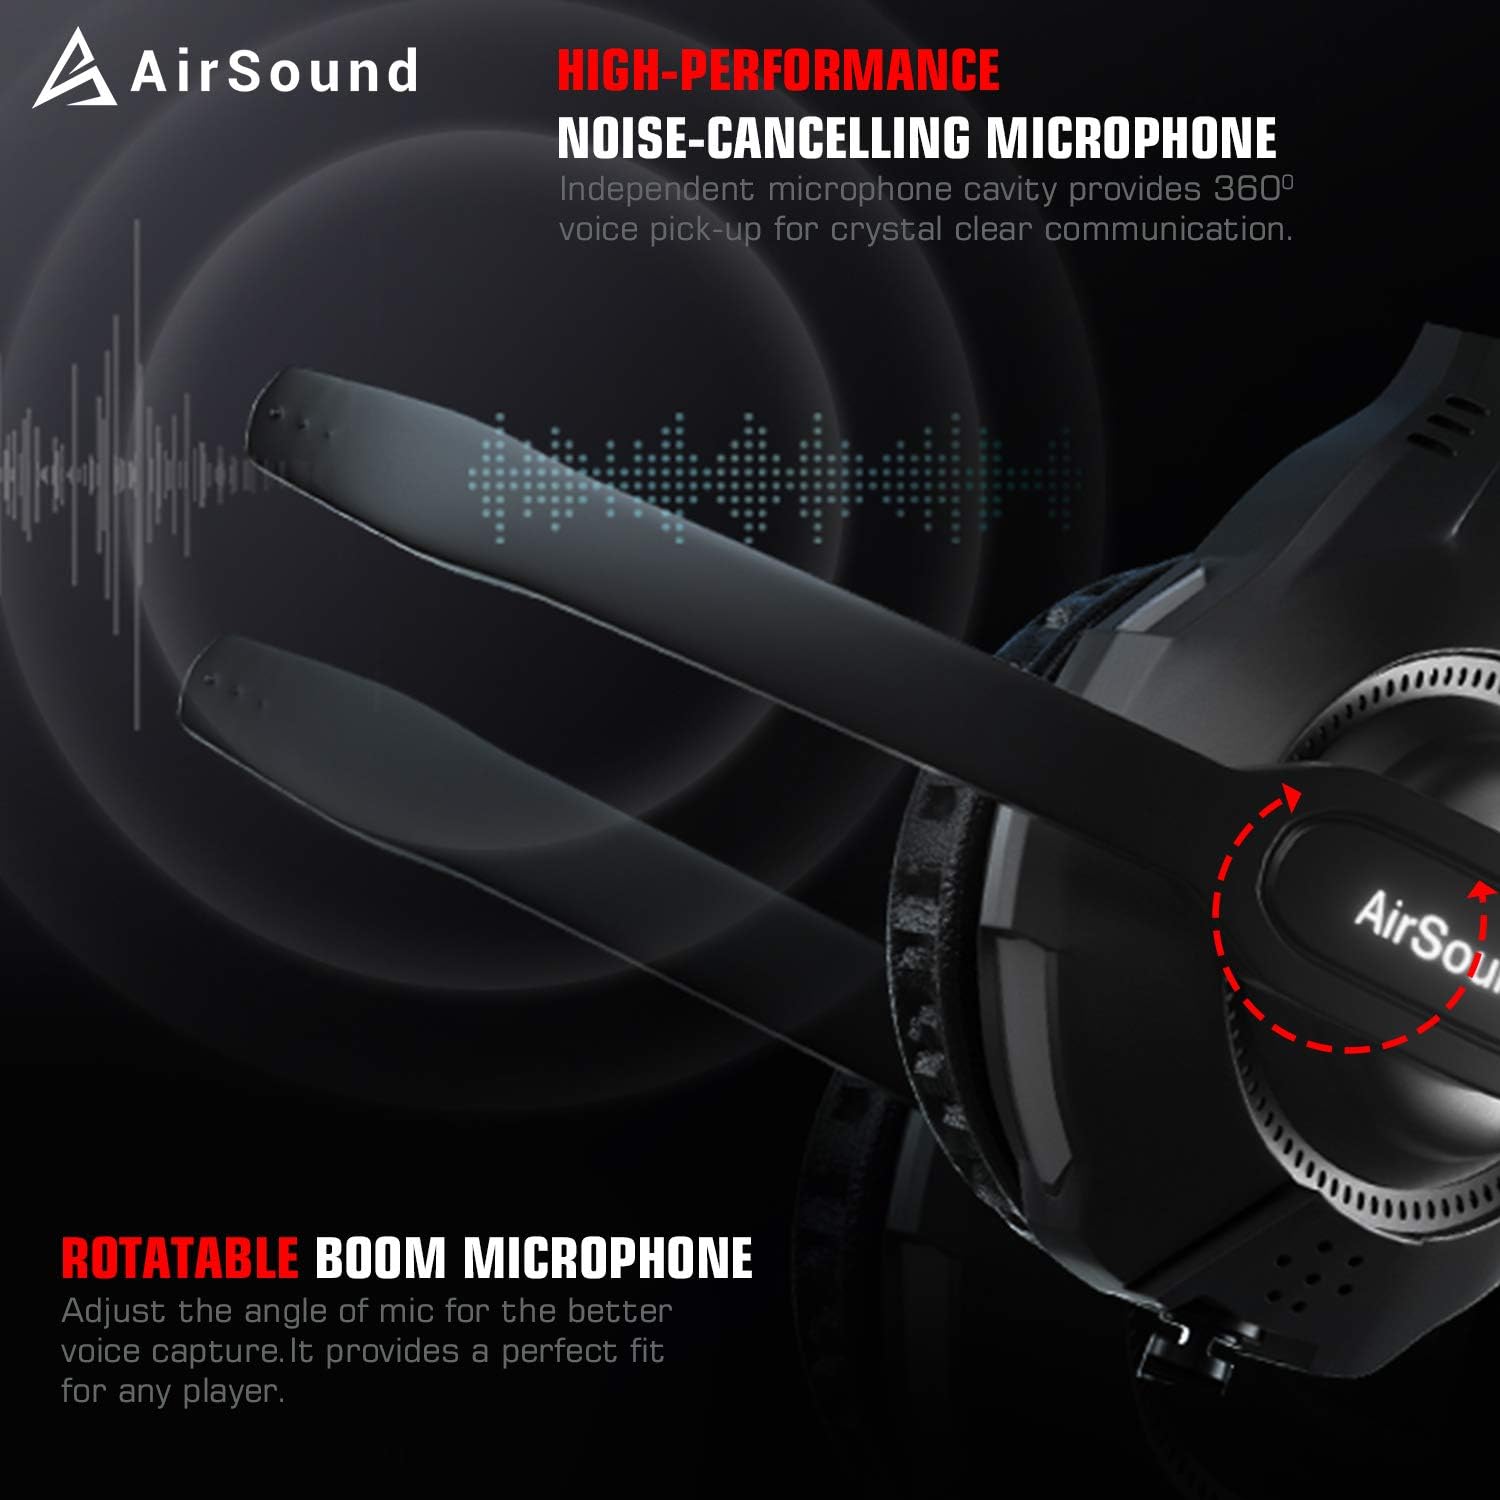 Airsound Alpha-5 Stereo Gaming Headset For Ps4 Pc Xbox One Ps5 Controller, Noise Cancelling Over-Ear Headphones With Mic, Rbg Led, Bass Surround, Soft Memory Earmuffs For Laptop Mac Nintendo Nes Games